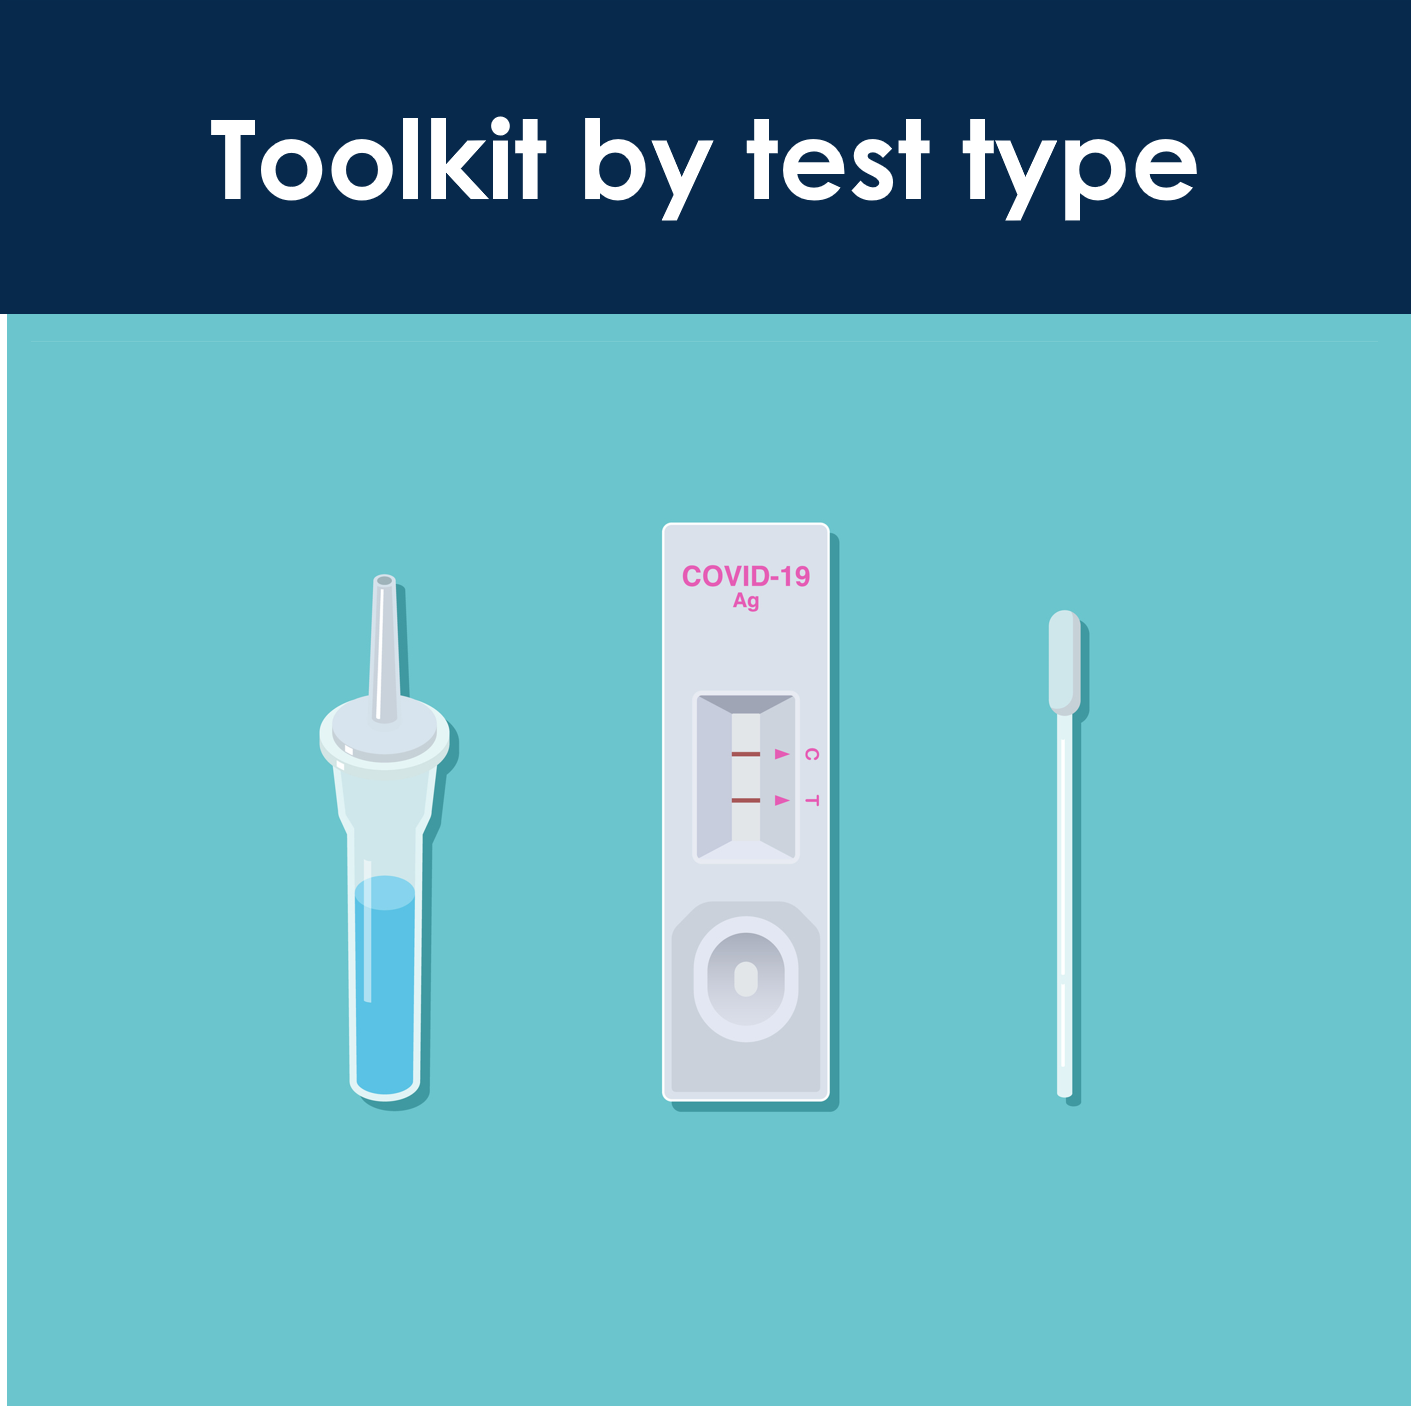 Toolkit by test type